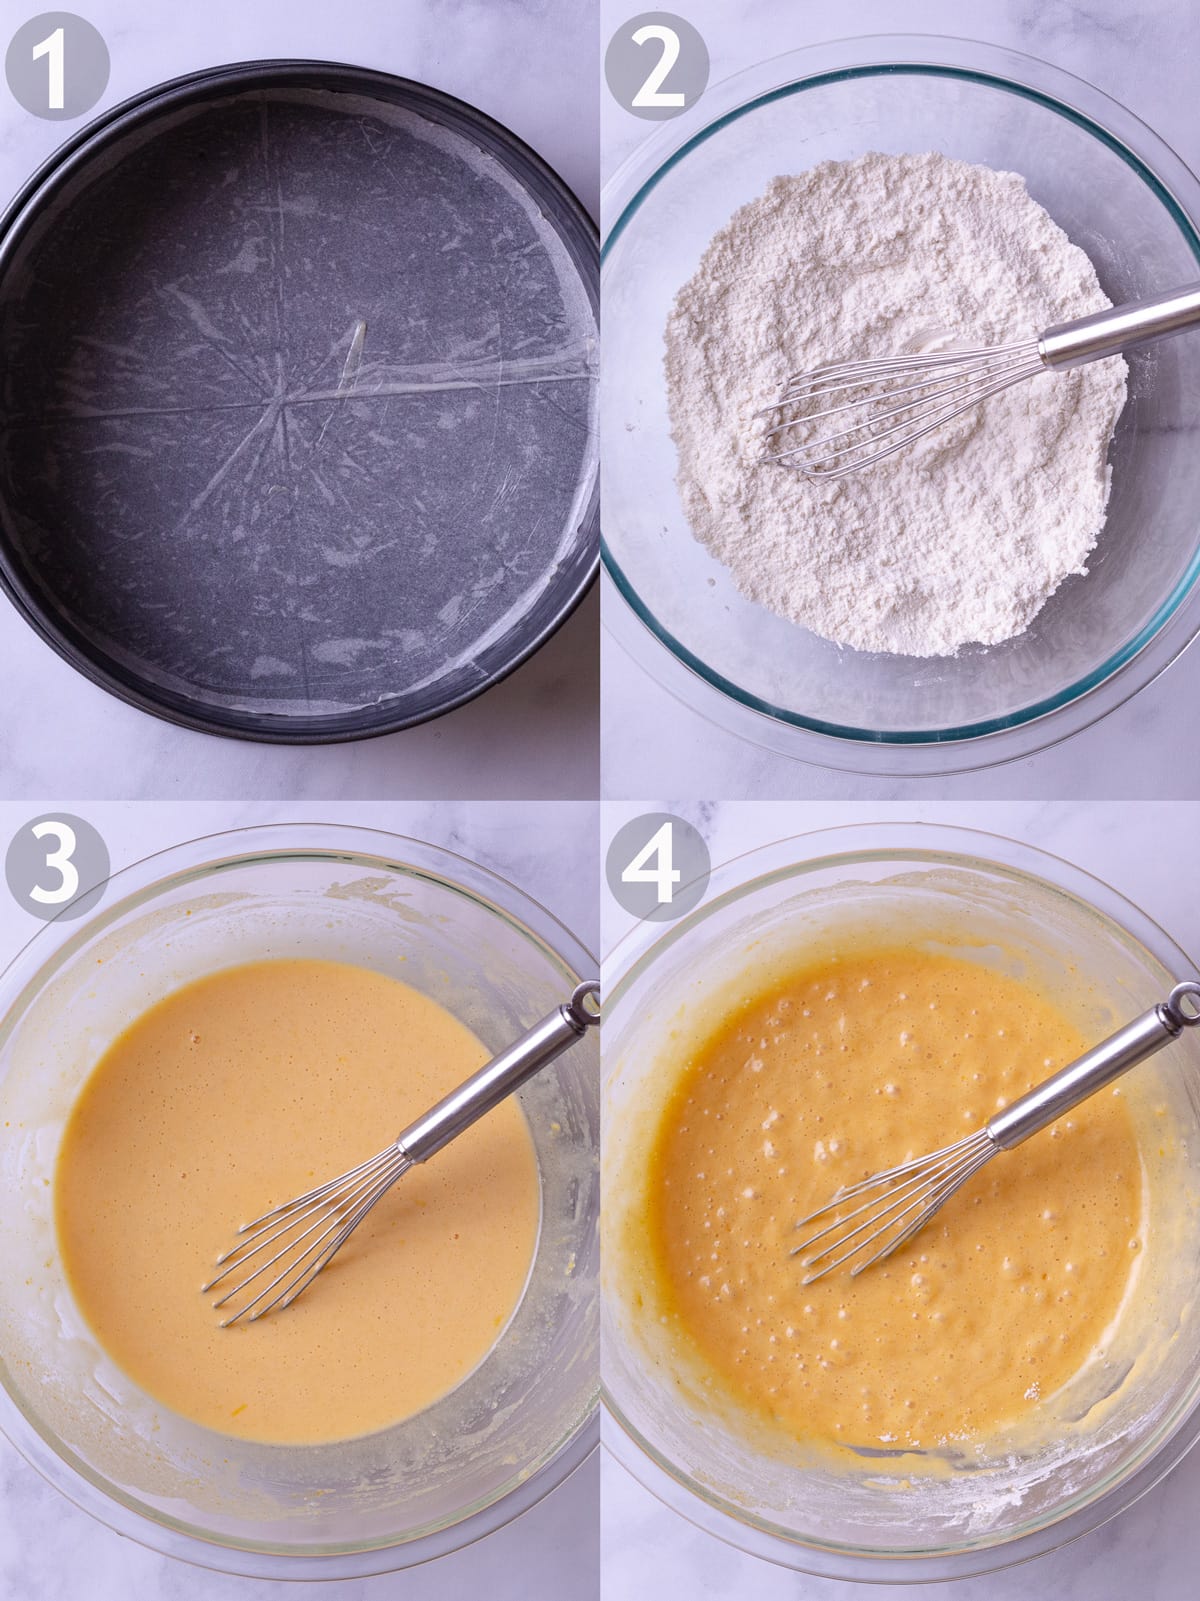 First 4 steps to prepare cake including lining and greasing a springform pan, mixing dry ingredients, mixing wet ingredients and combining wet and dry ingredients.